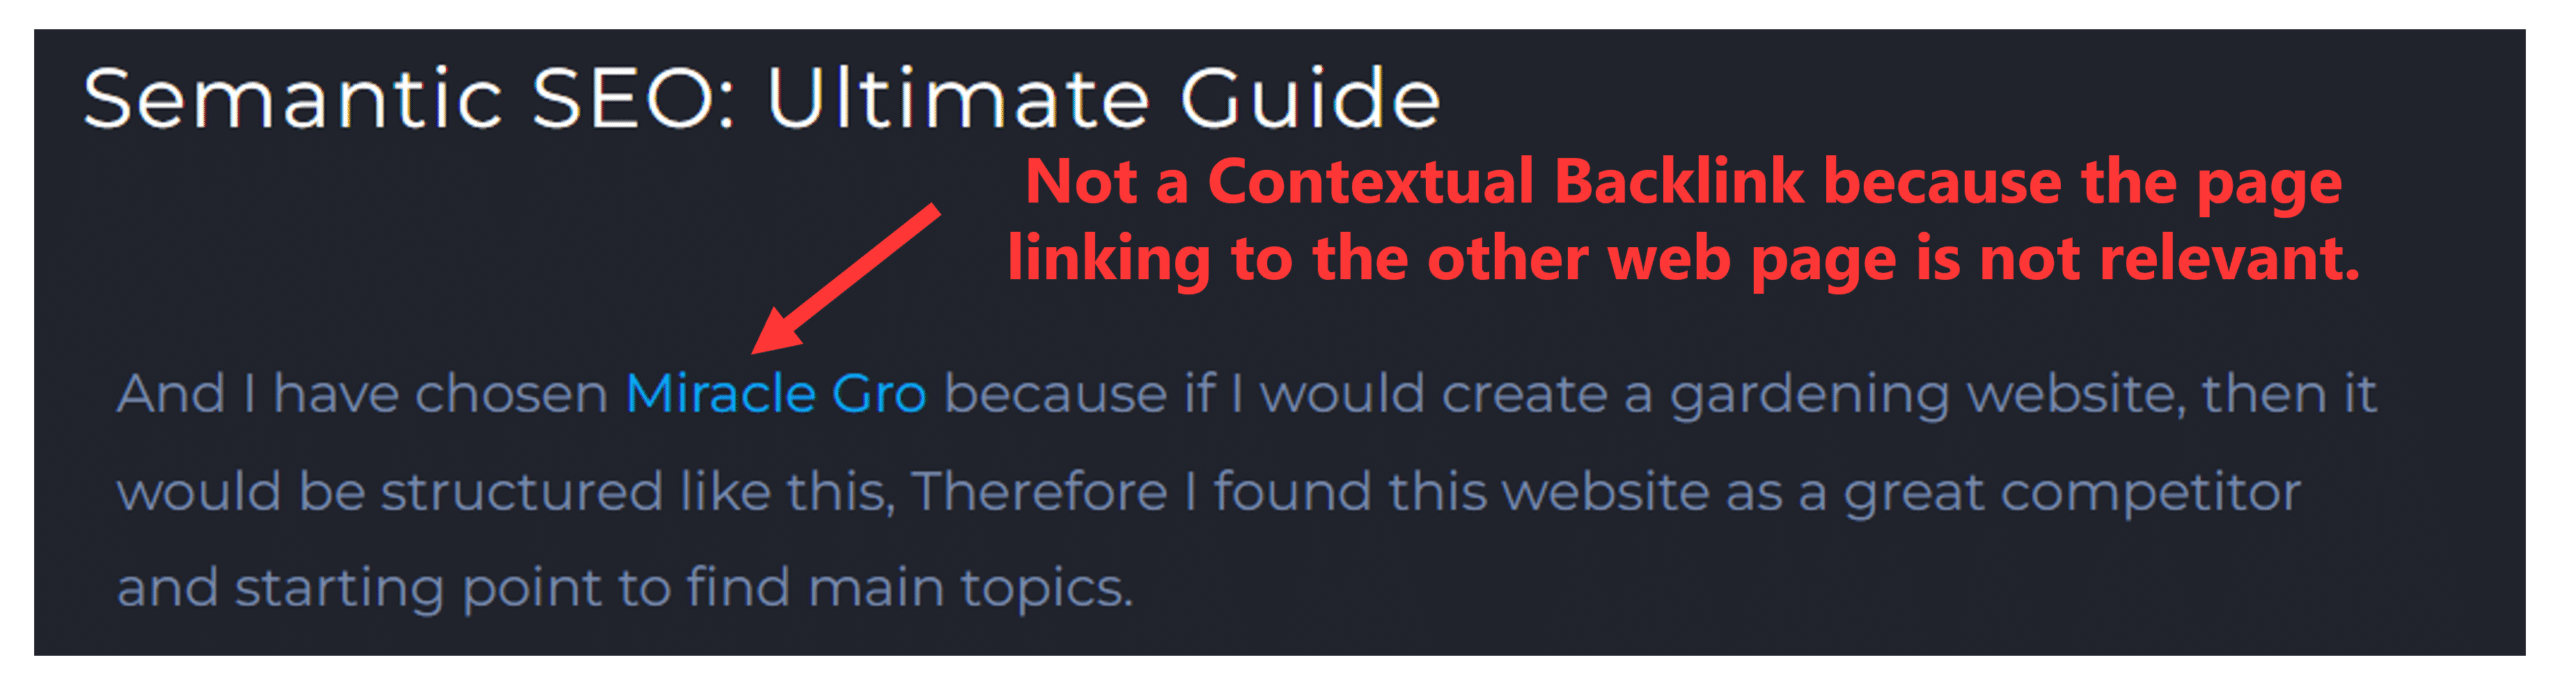 example of what are not contextual backlinks